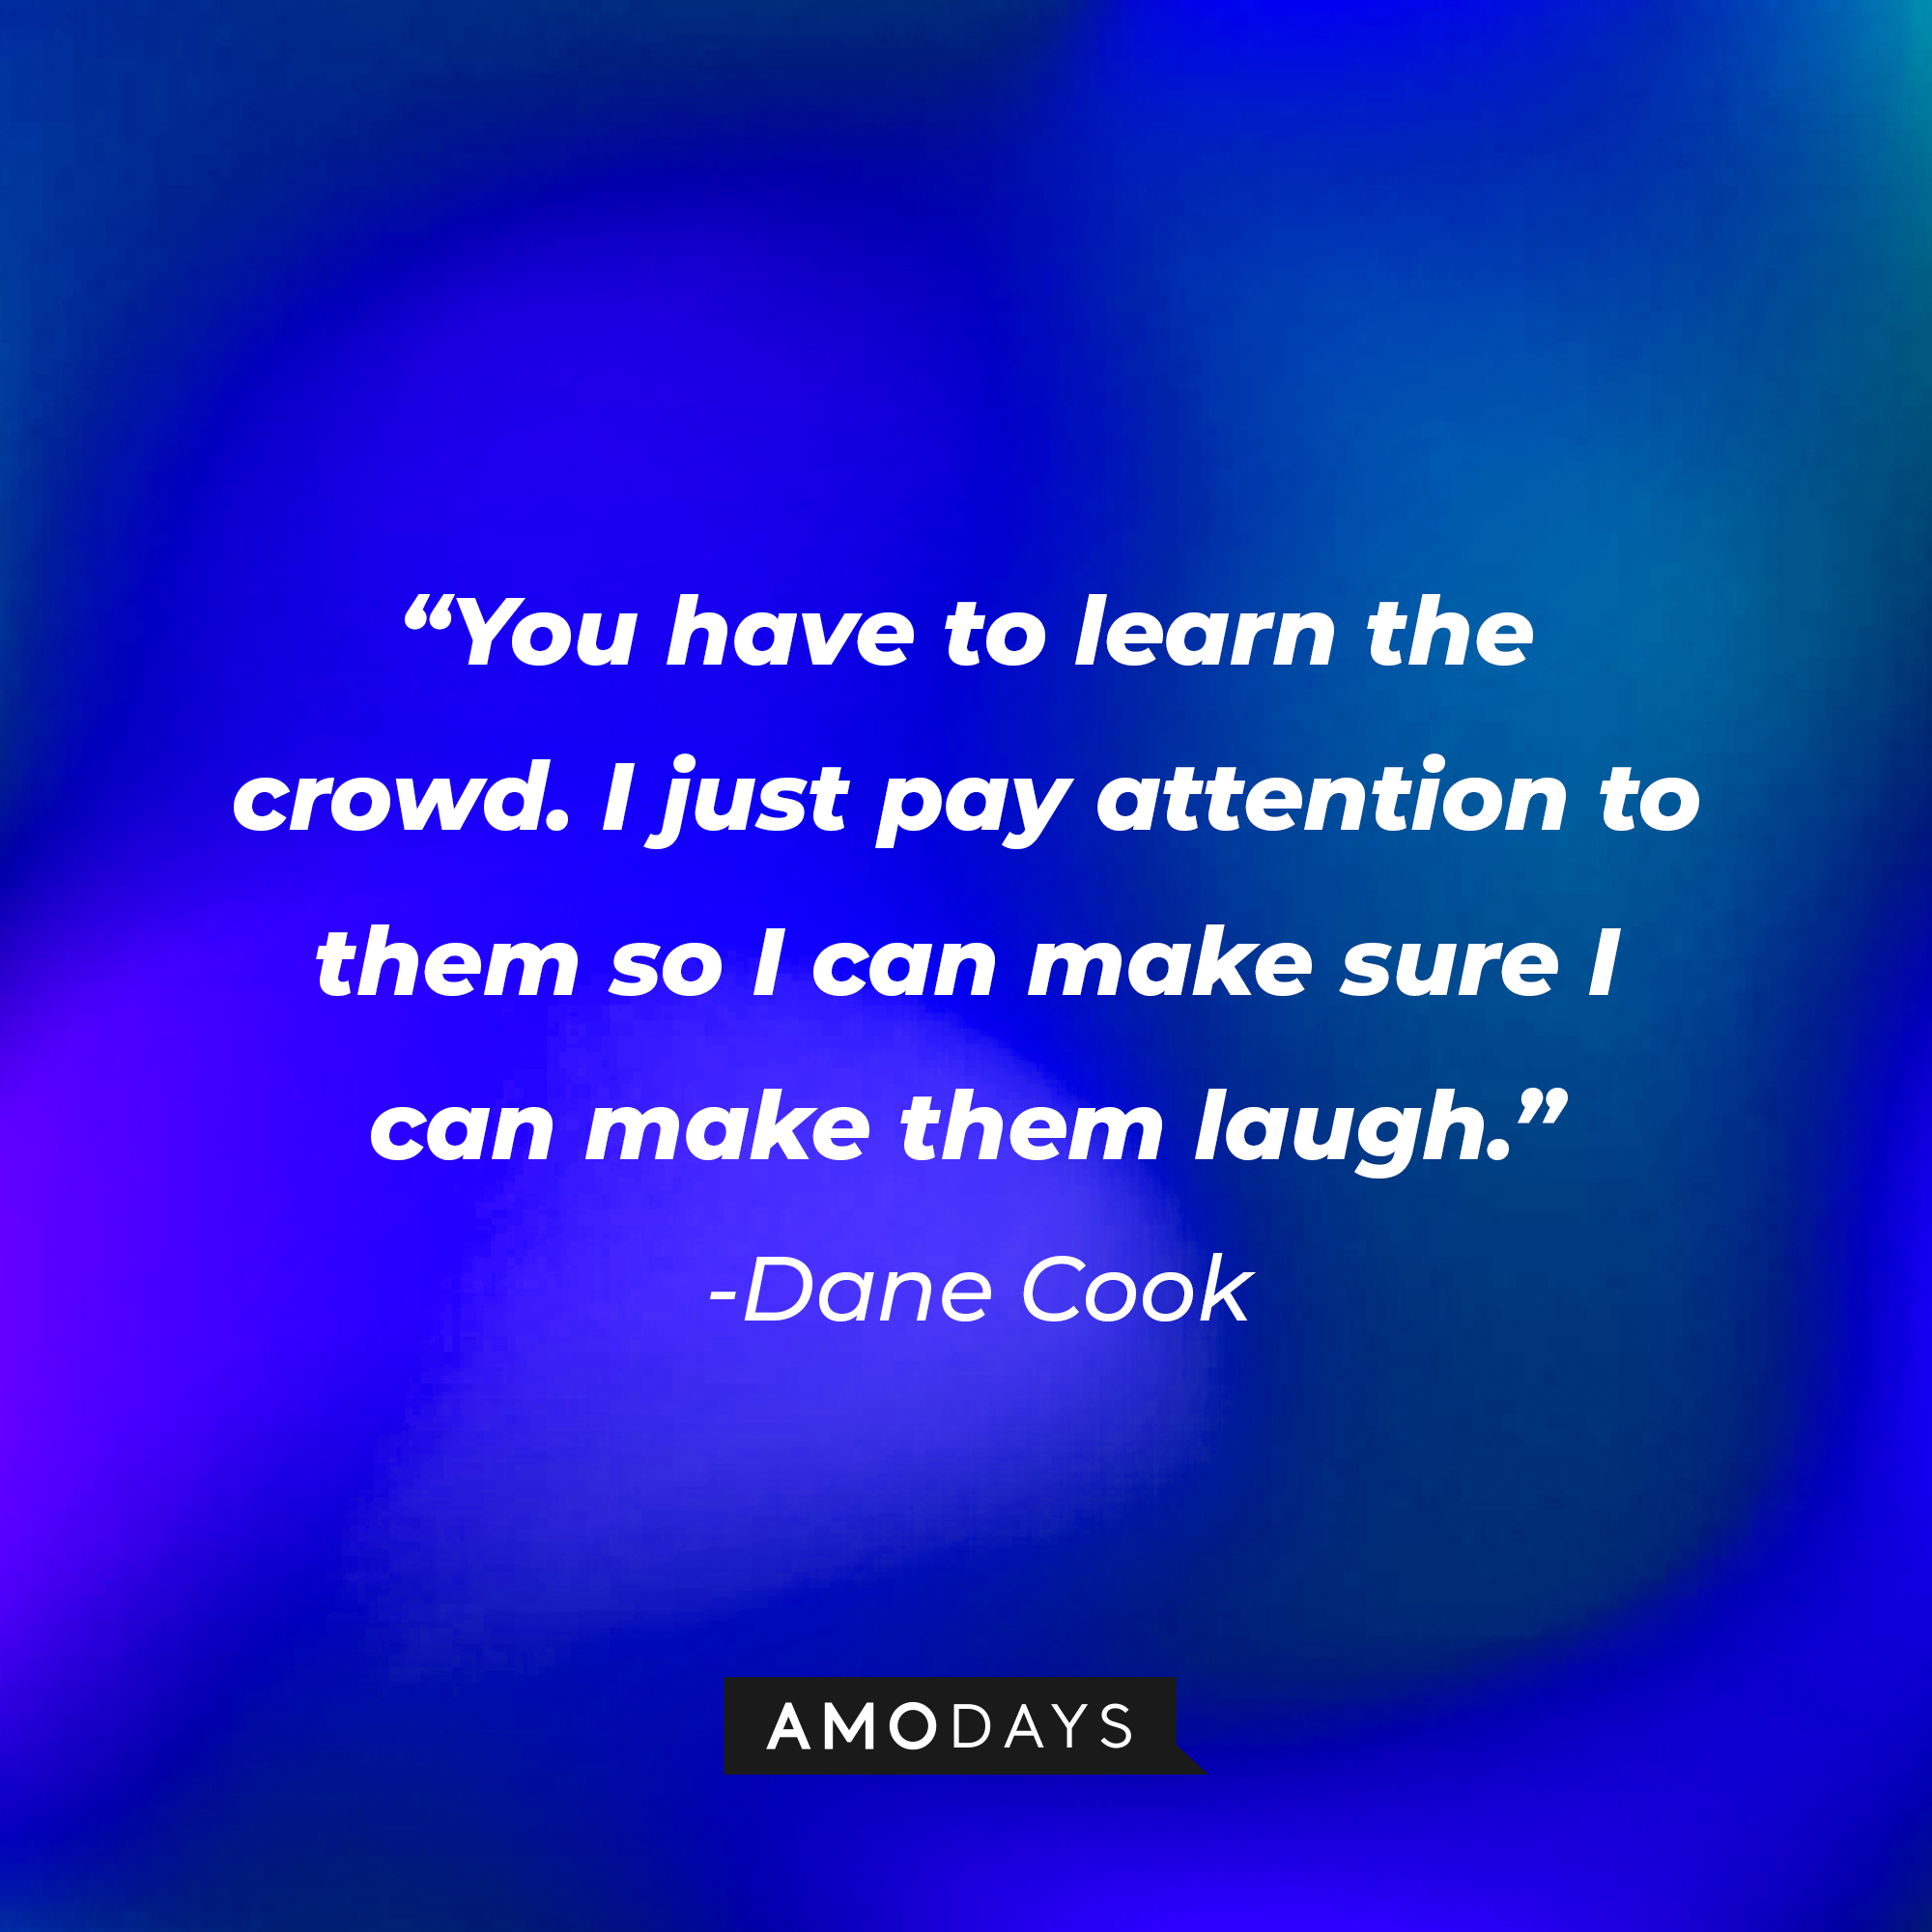 Dane Cook's quote: "You have to learn the crowd. I just pay attention to them so I can make sure I can make them laugh.” | Source: Amodays